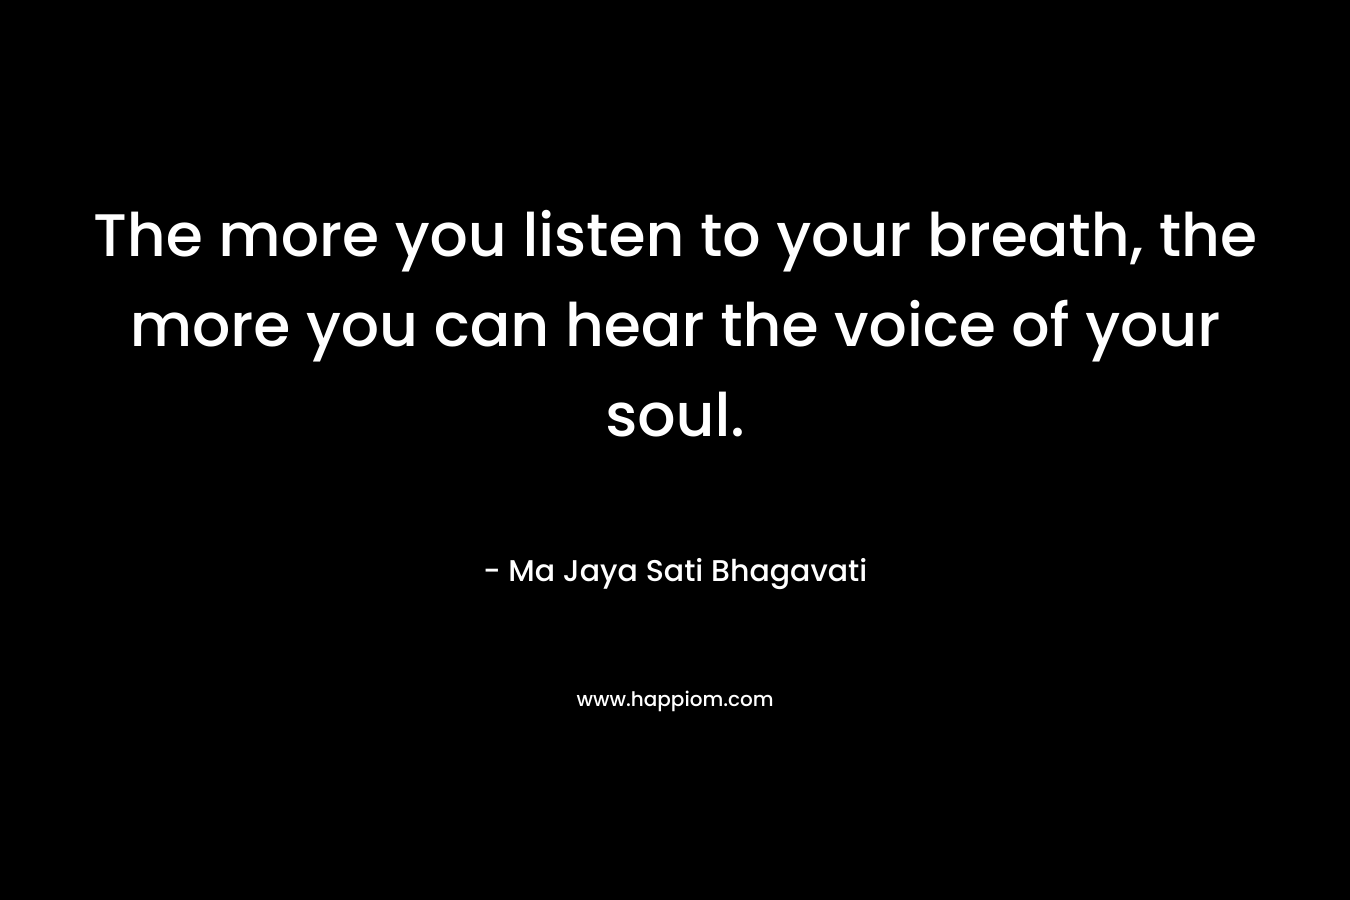 The more you listen to your breath, the more you can hear the voice of your soul.